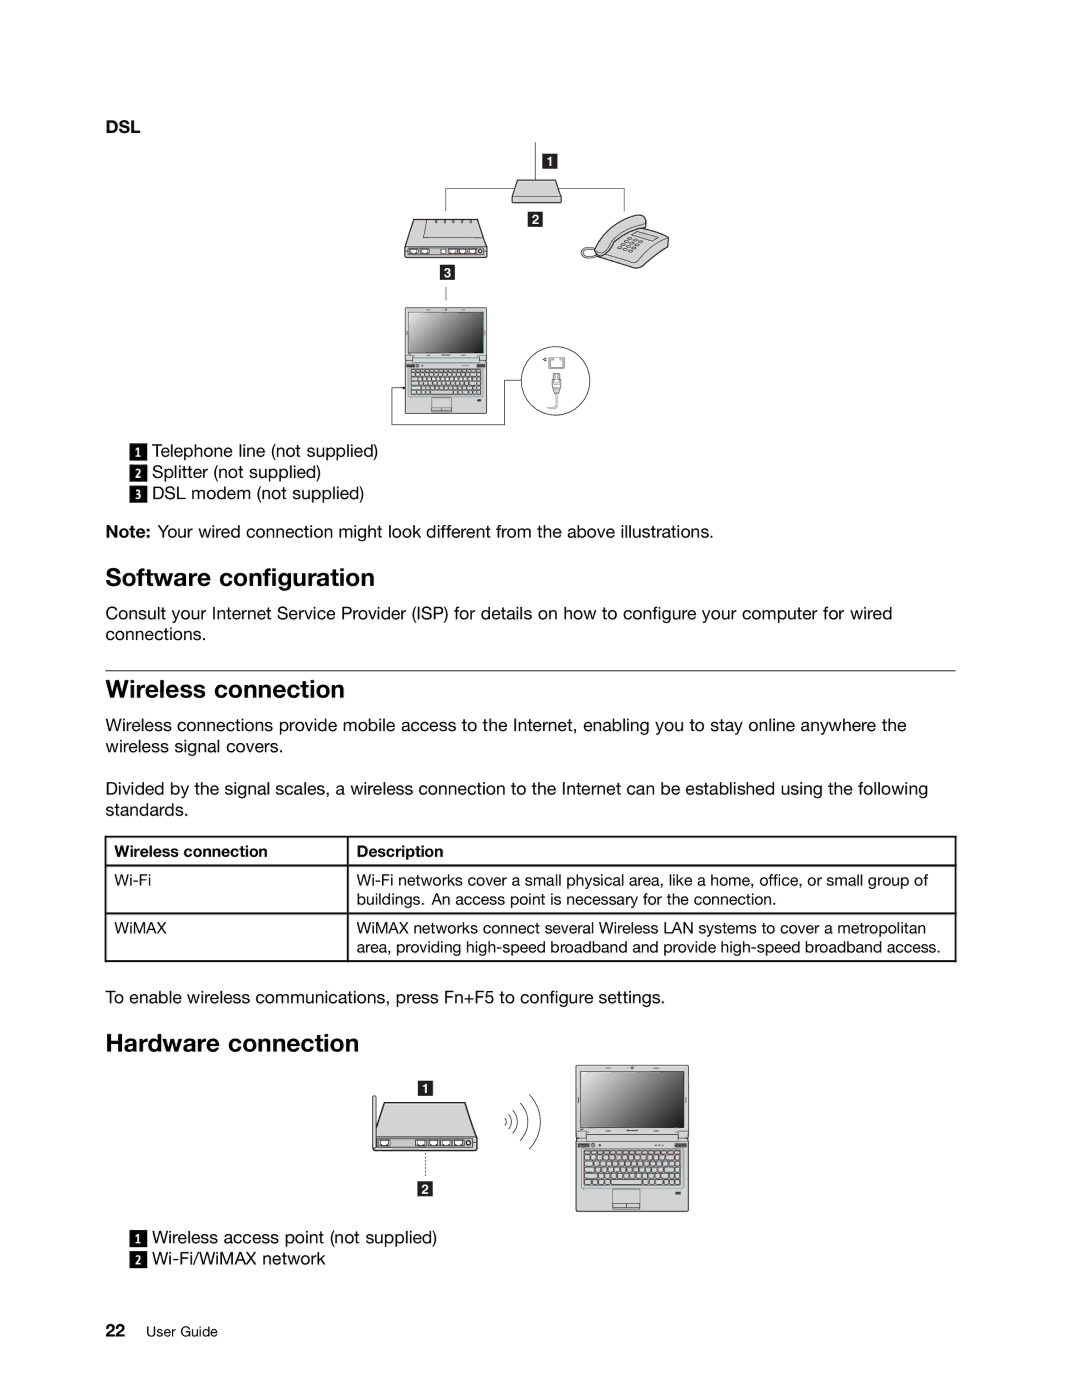 Lenovo B485 manual Software configuration, Wireless connection 